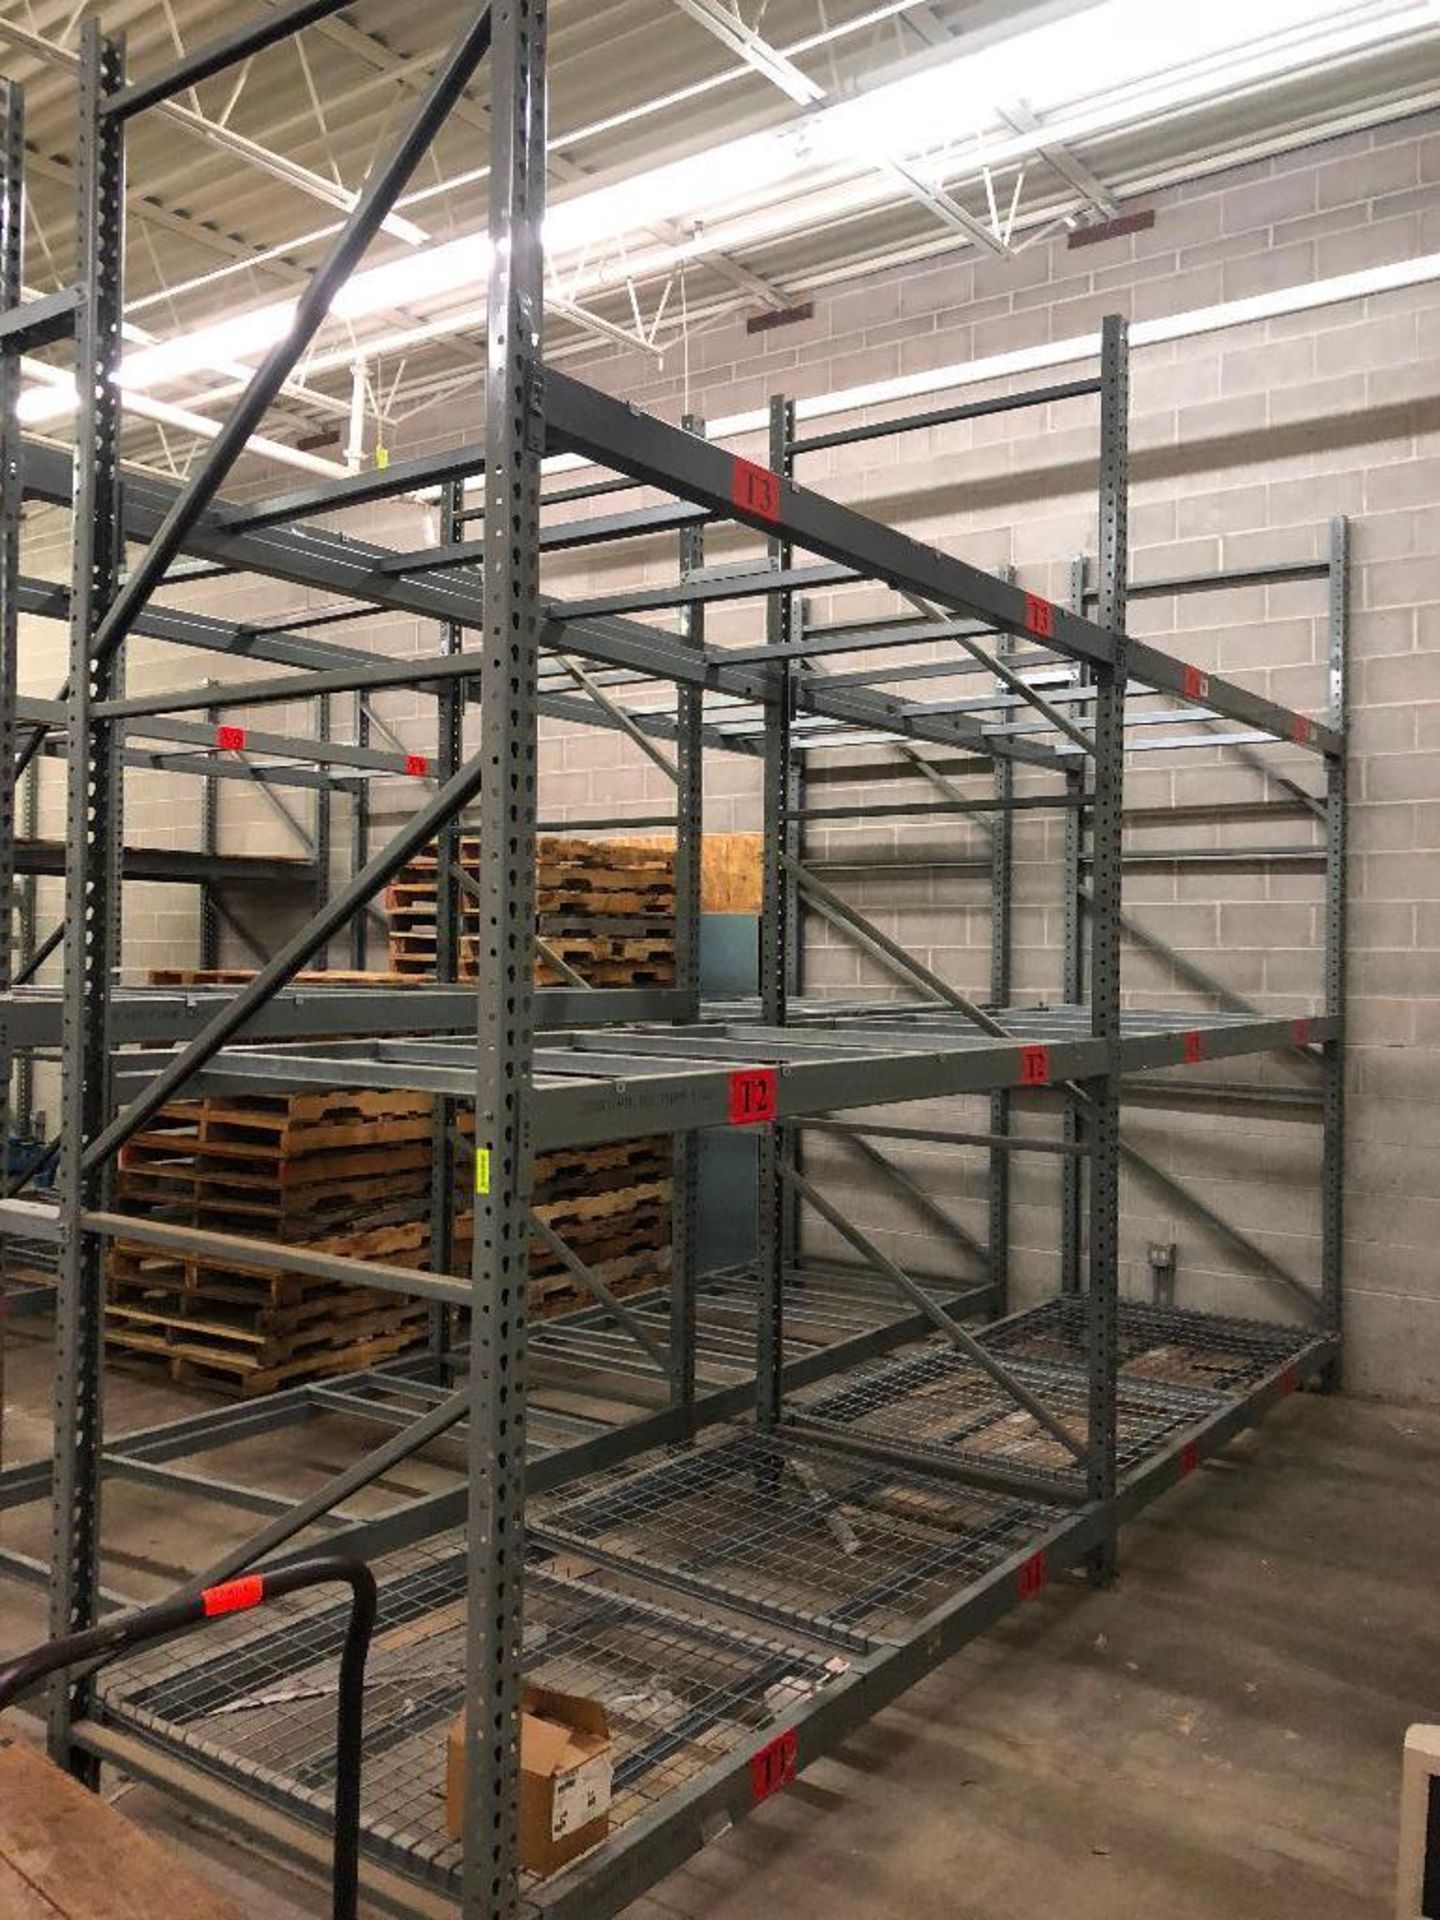 DESCRIPTION: (2) SECTIONS OF 8 FT X 48 IN PALLET RACKING ADDITIONAL INFORMATION: W/ (3) UPRIGHTS, (1